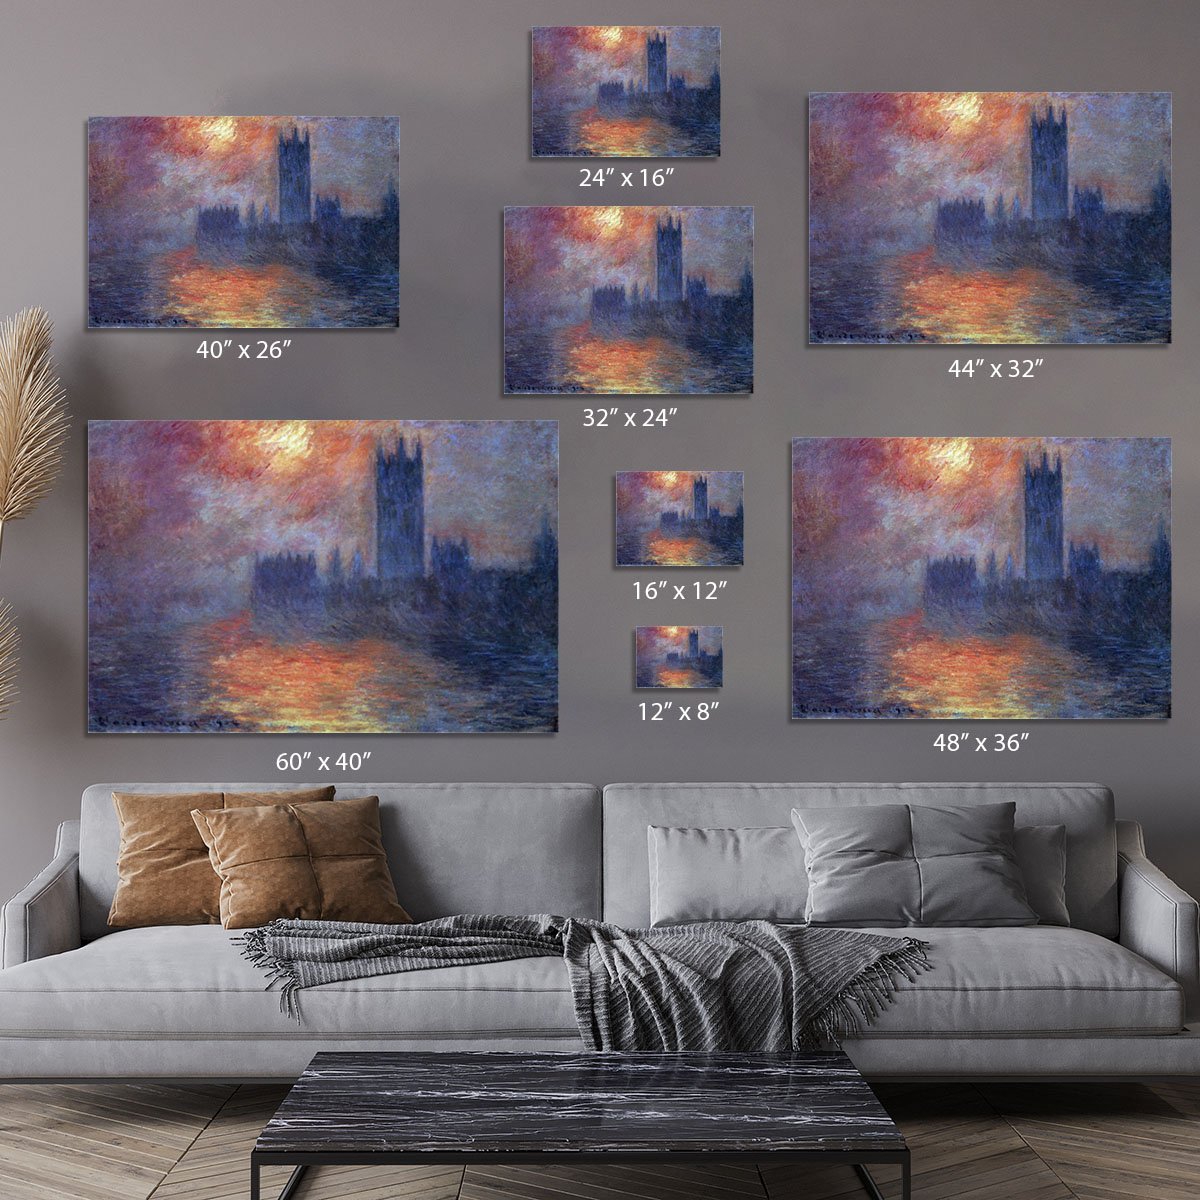 The Houses of Parliament Sunset by Monet Canvas Print or Poster